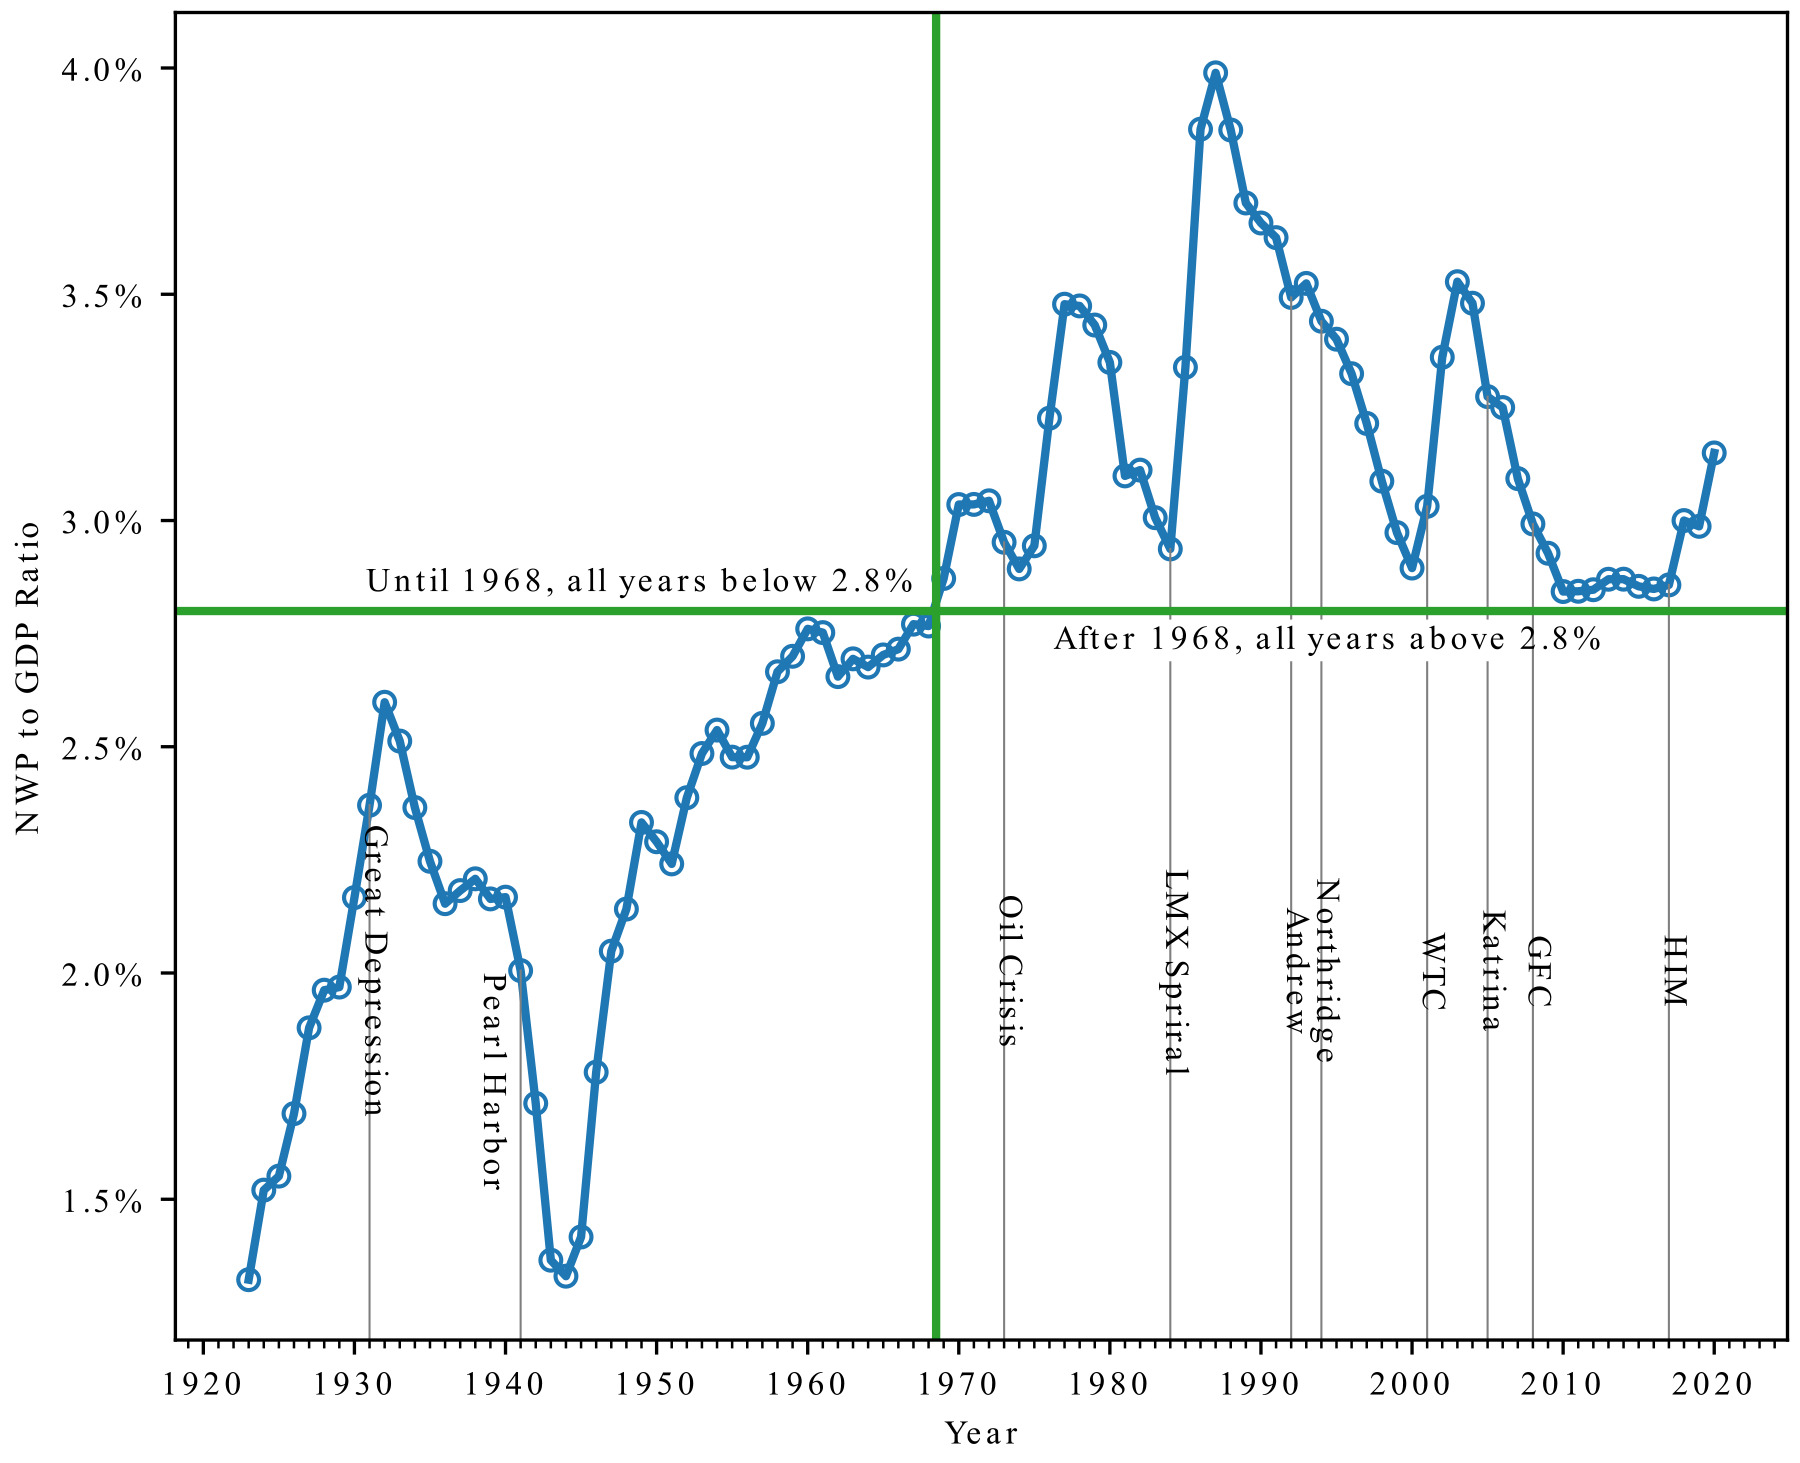 The 2.8 percent level (green lines) separates 1968 and prior from all subsequent years. The ratio was less than 2.8 percent in every year until 1968, while it has been greater than 2.8 percent in every year since. Significant insurance-related events are called out on the x-axis.